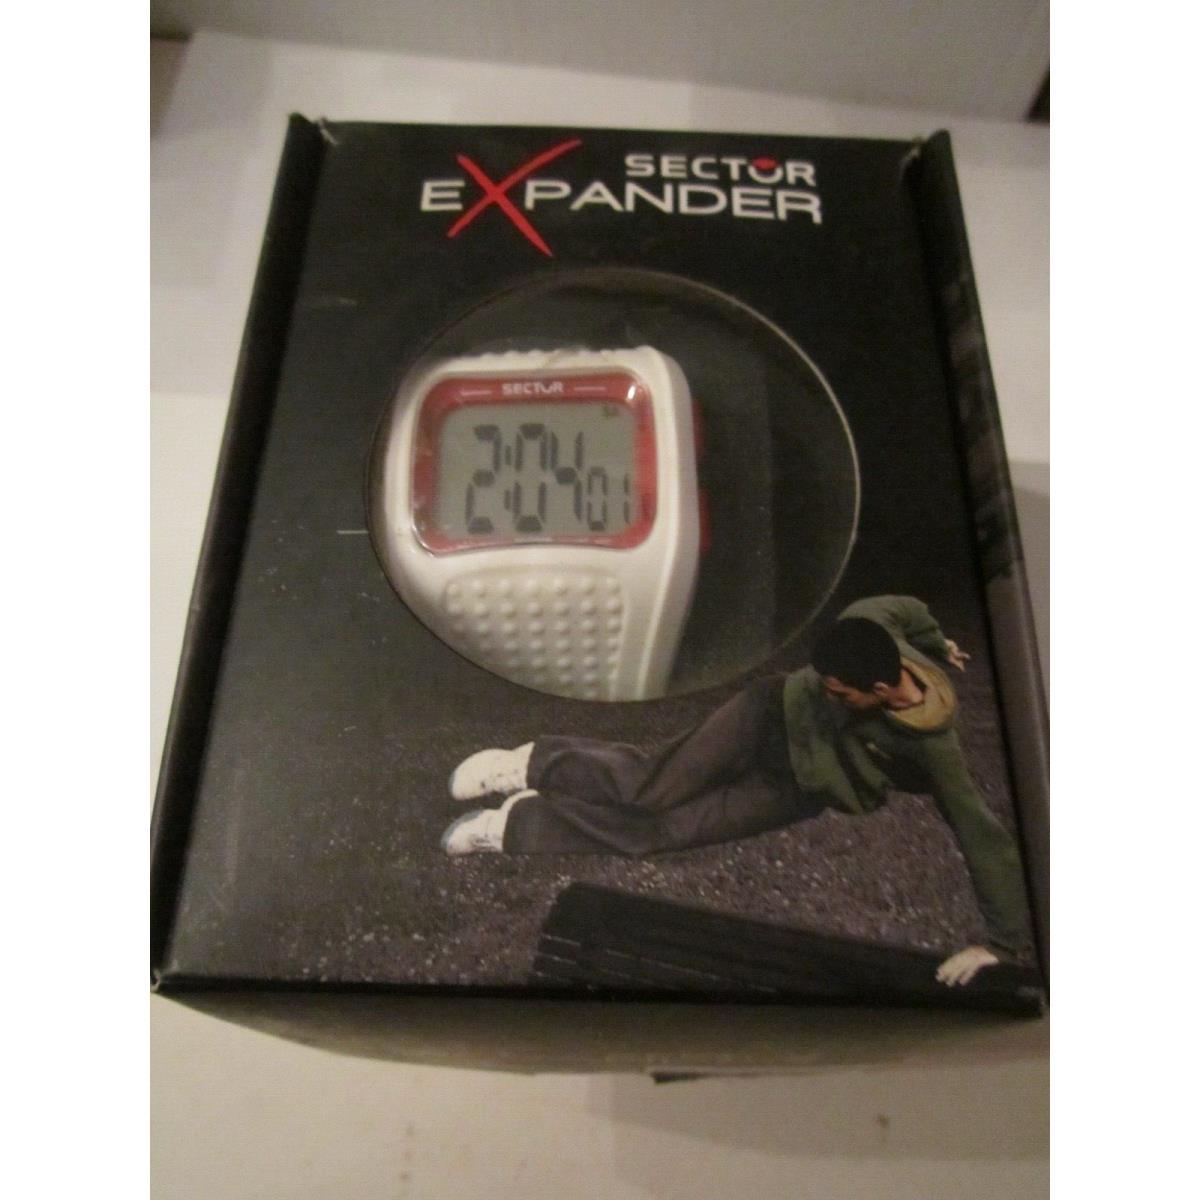 Sector Watch Expander Digital IN The Box with The Booklet Card